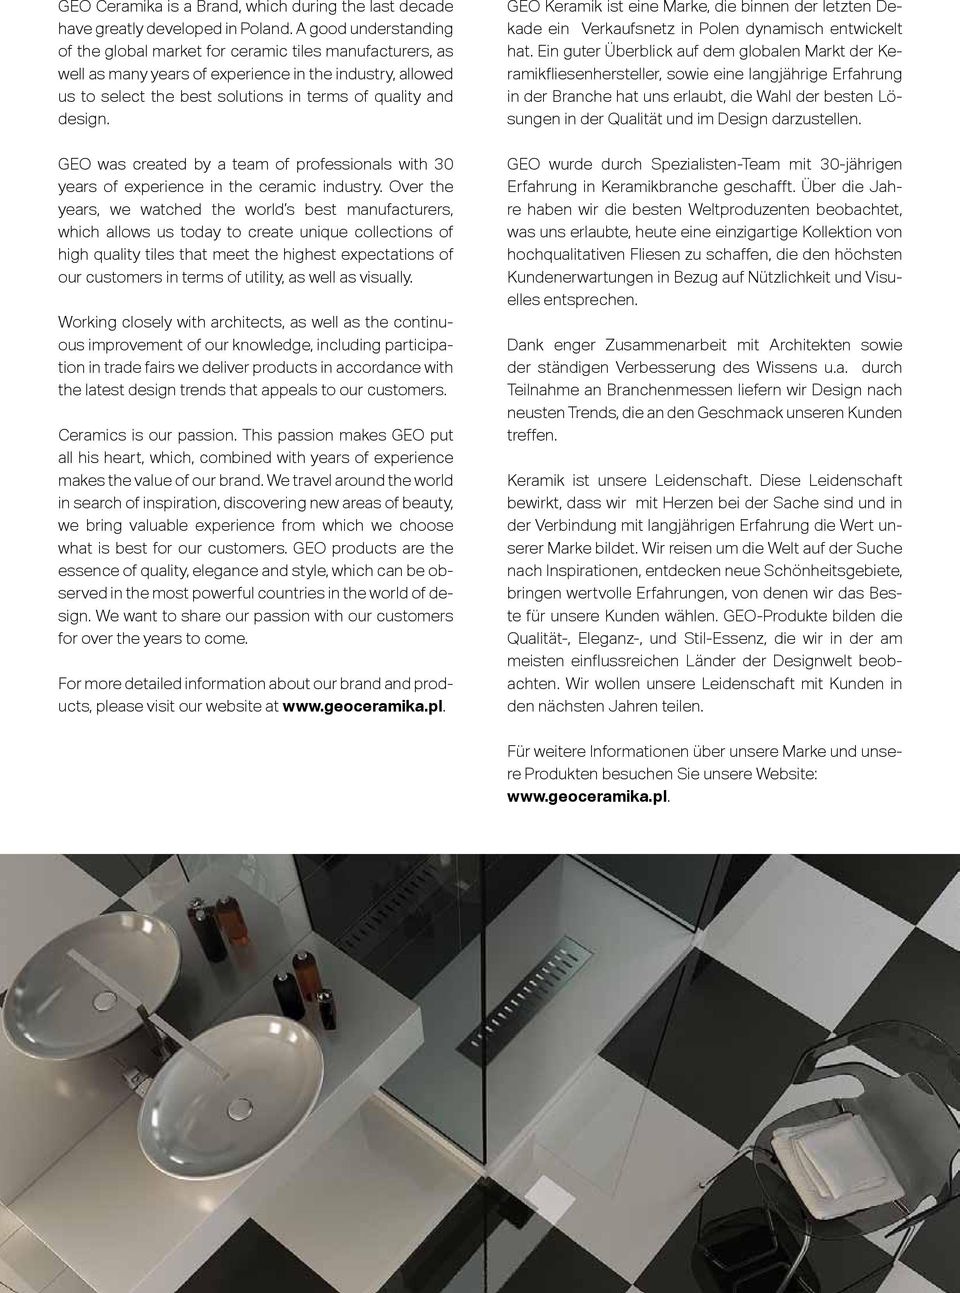 GEO was created by a team of professionals with 30 years of experience in the ceramic industry.